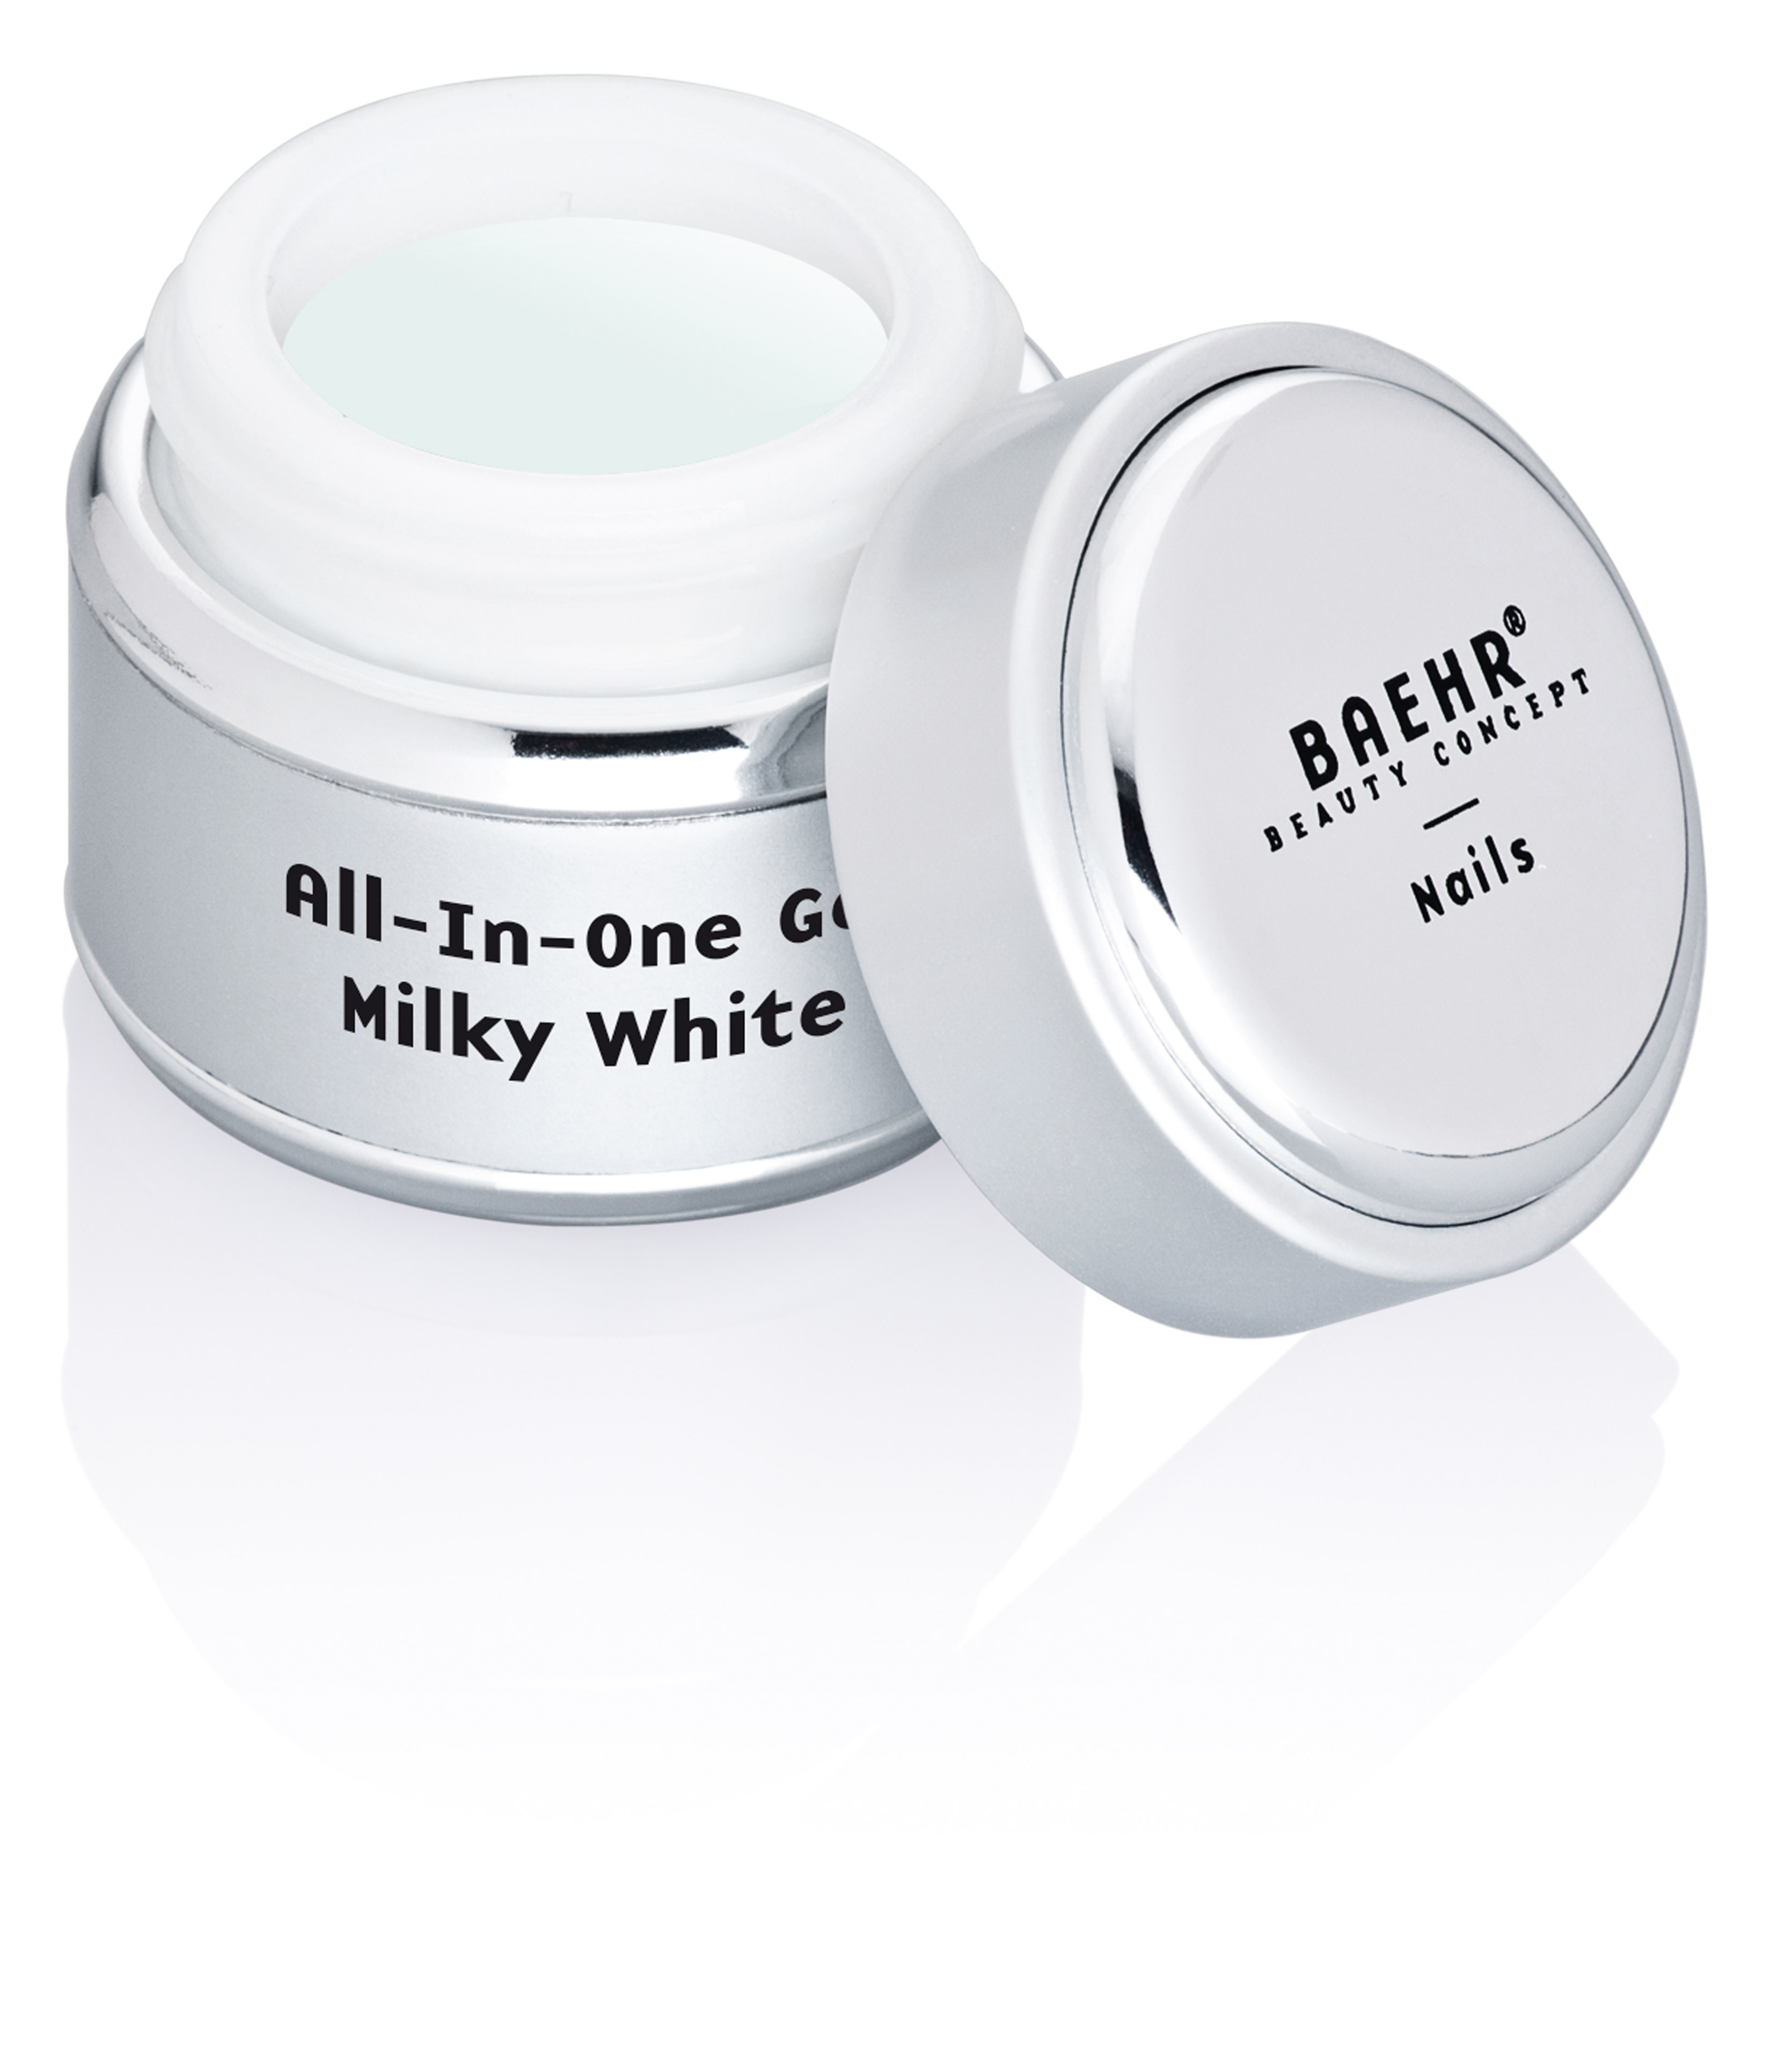 BAEHR BEAUTY CONCEPT - NAILS All-In-One Gel milky white,UV & LED 30 ml